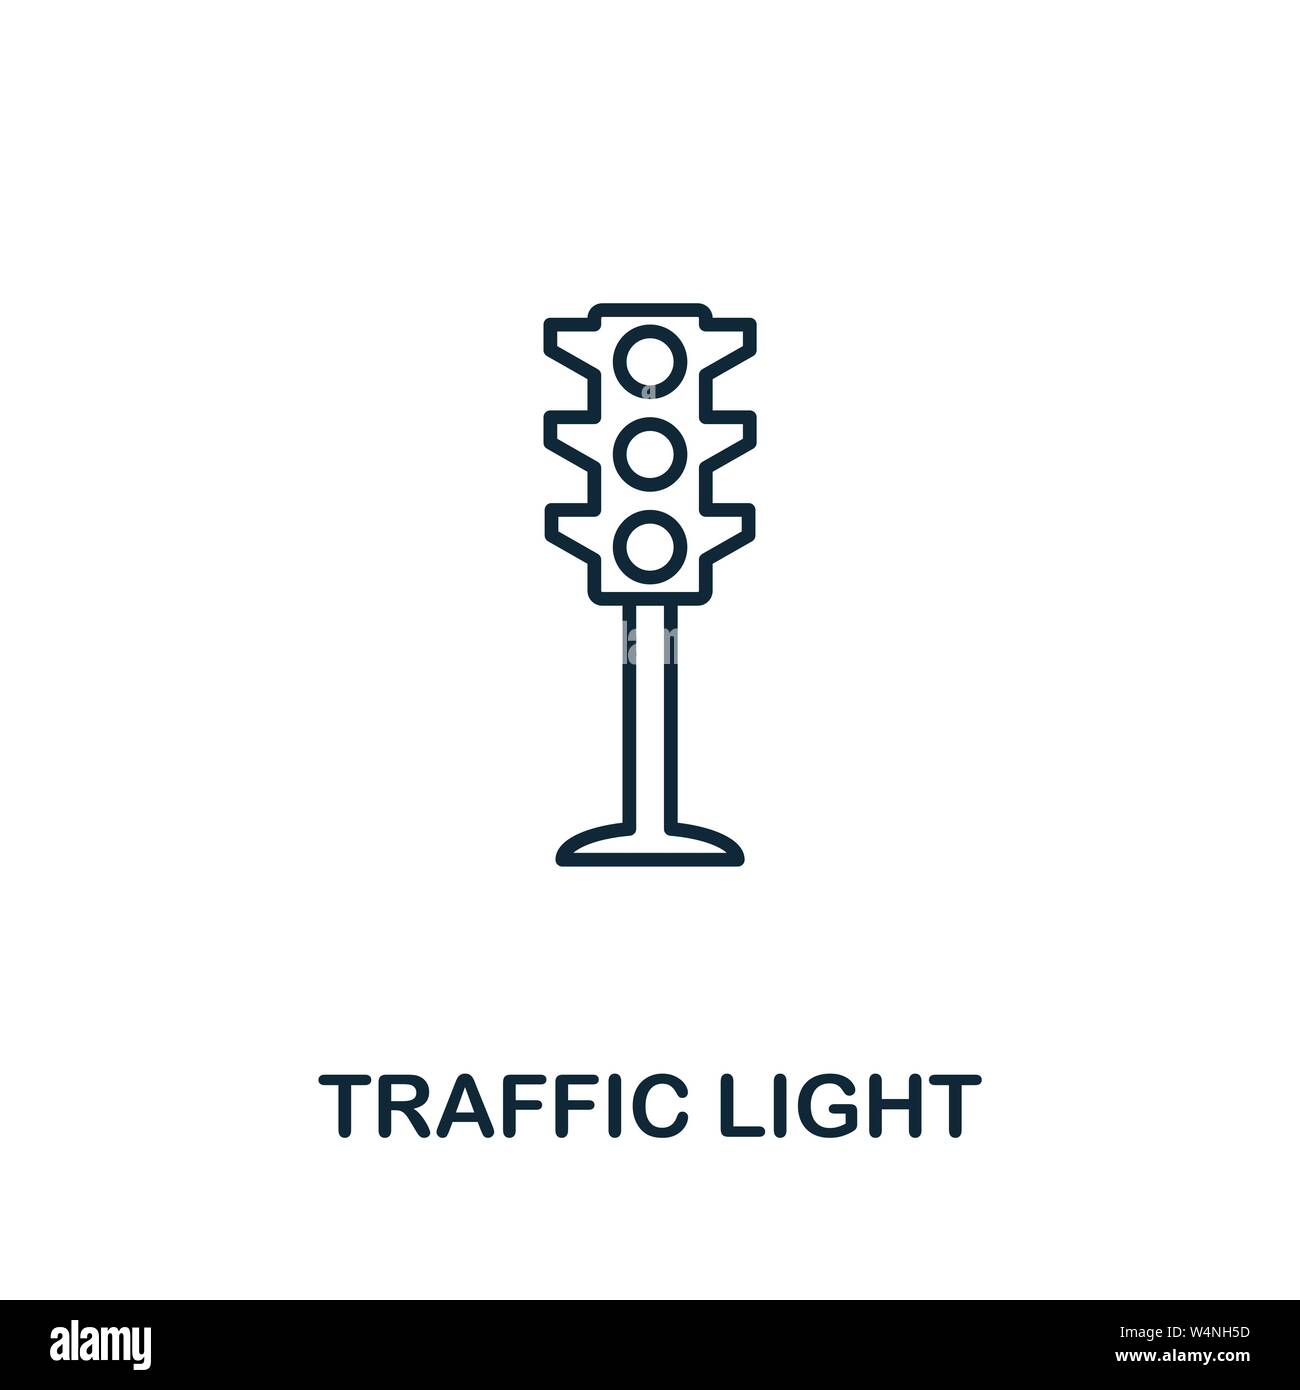 Traffic Light outline icon. Thin style design from city elements icons collection. Pixel perfect symbol of traffic light icon. Web design, apps Stock Vector